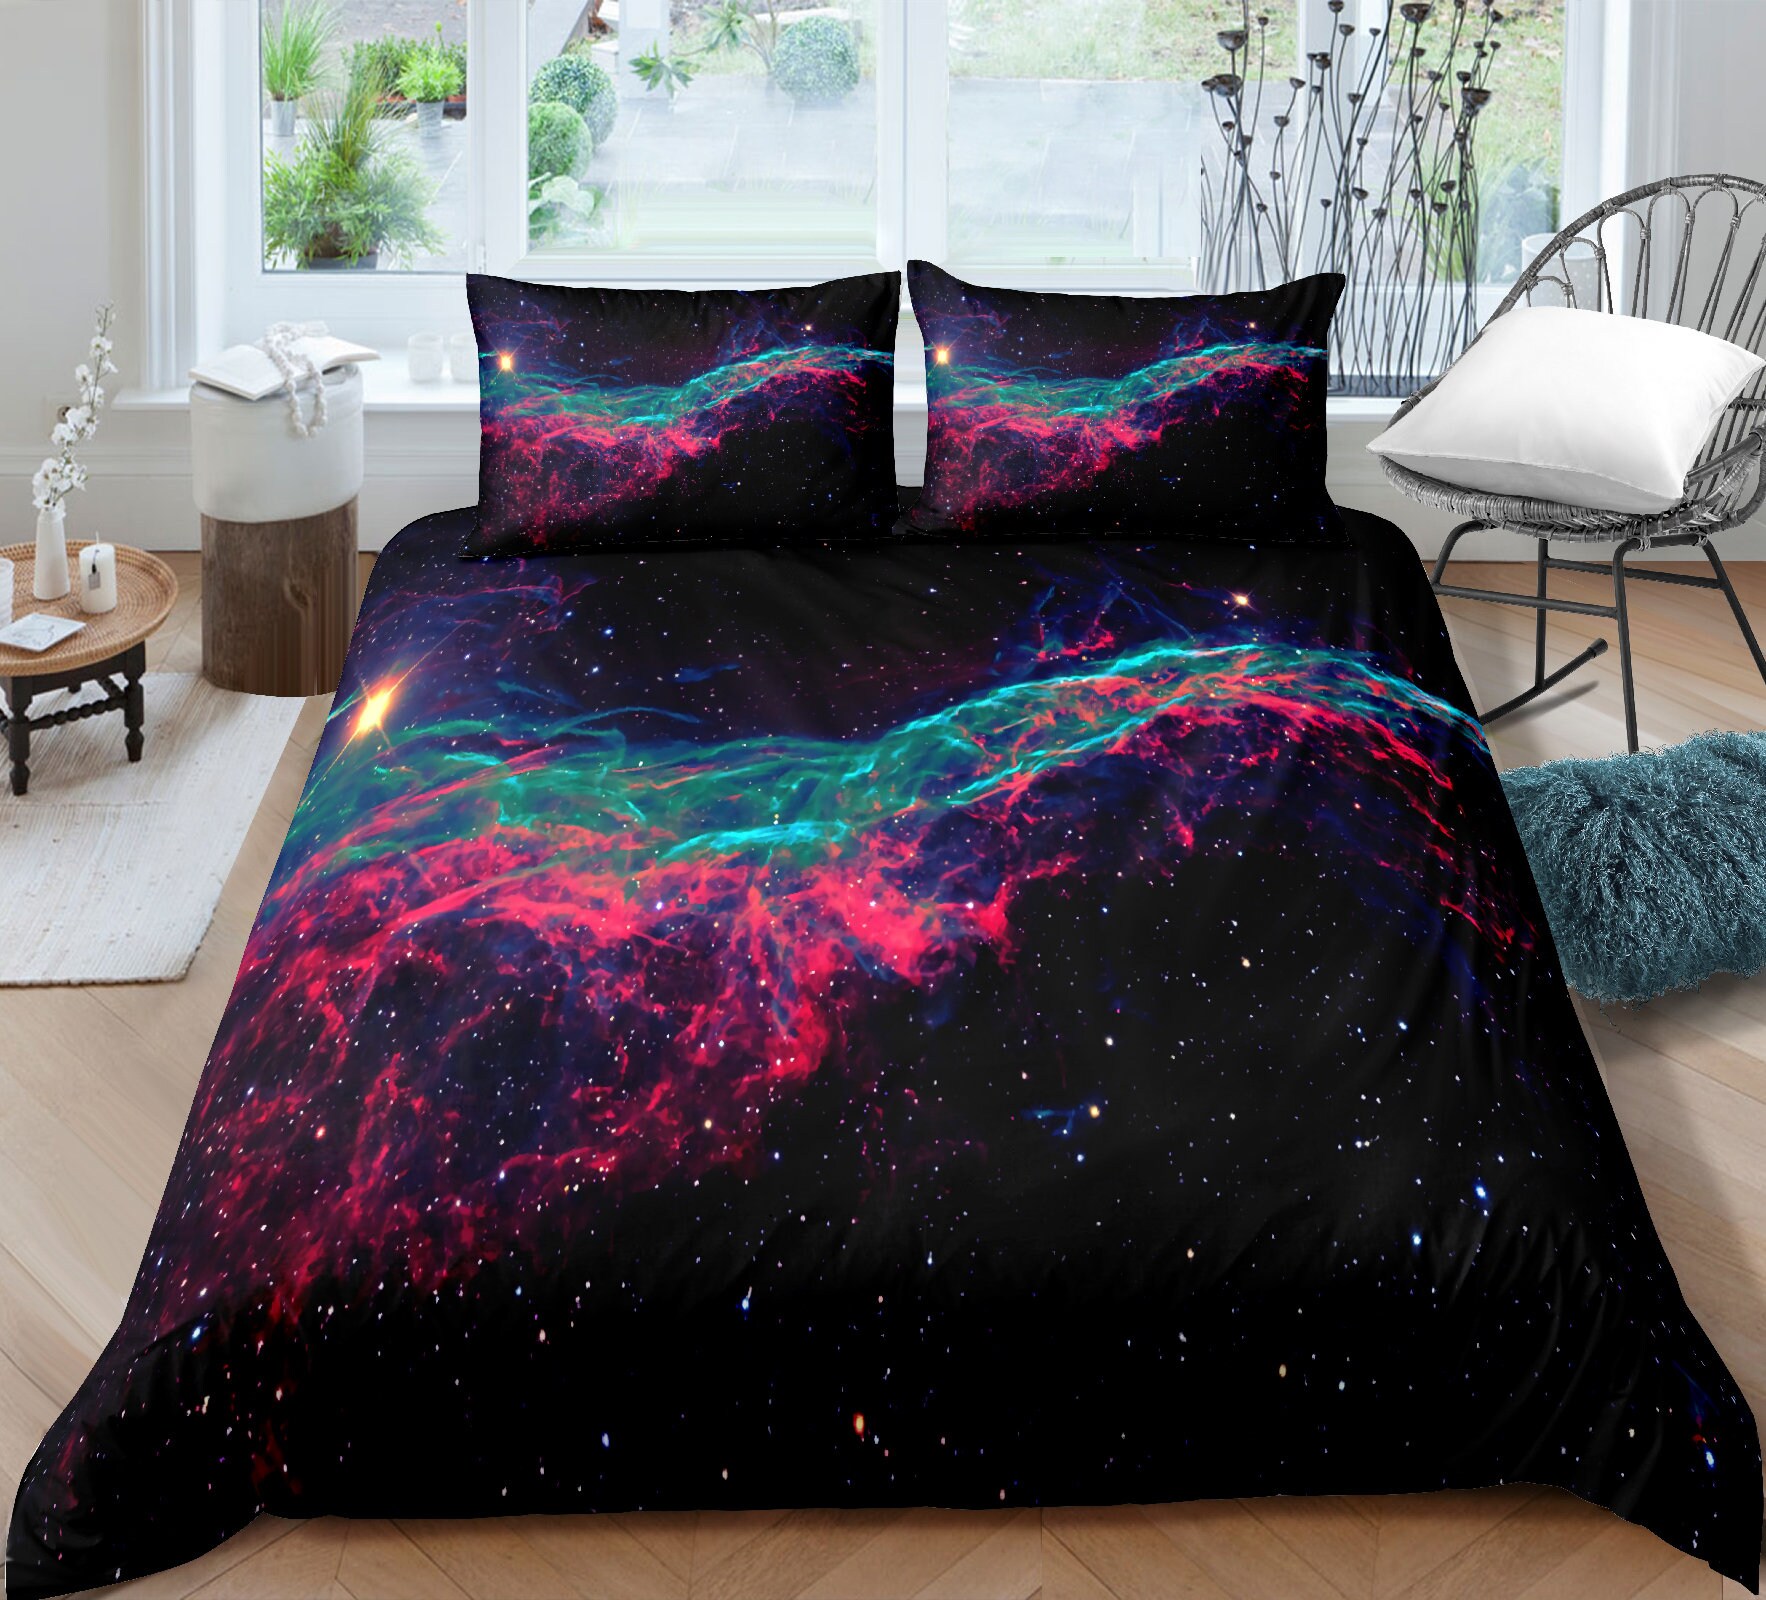 Bed Sheet Set Galaxy Stars Themed Bedding Set with Pillow Cases 